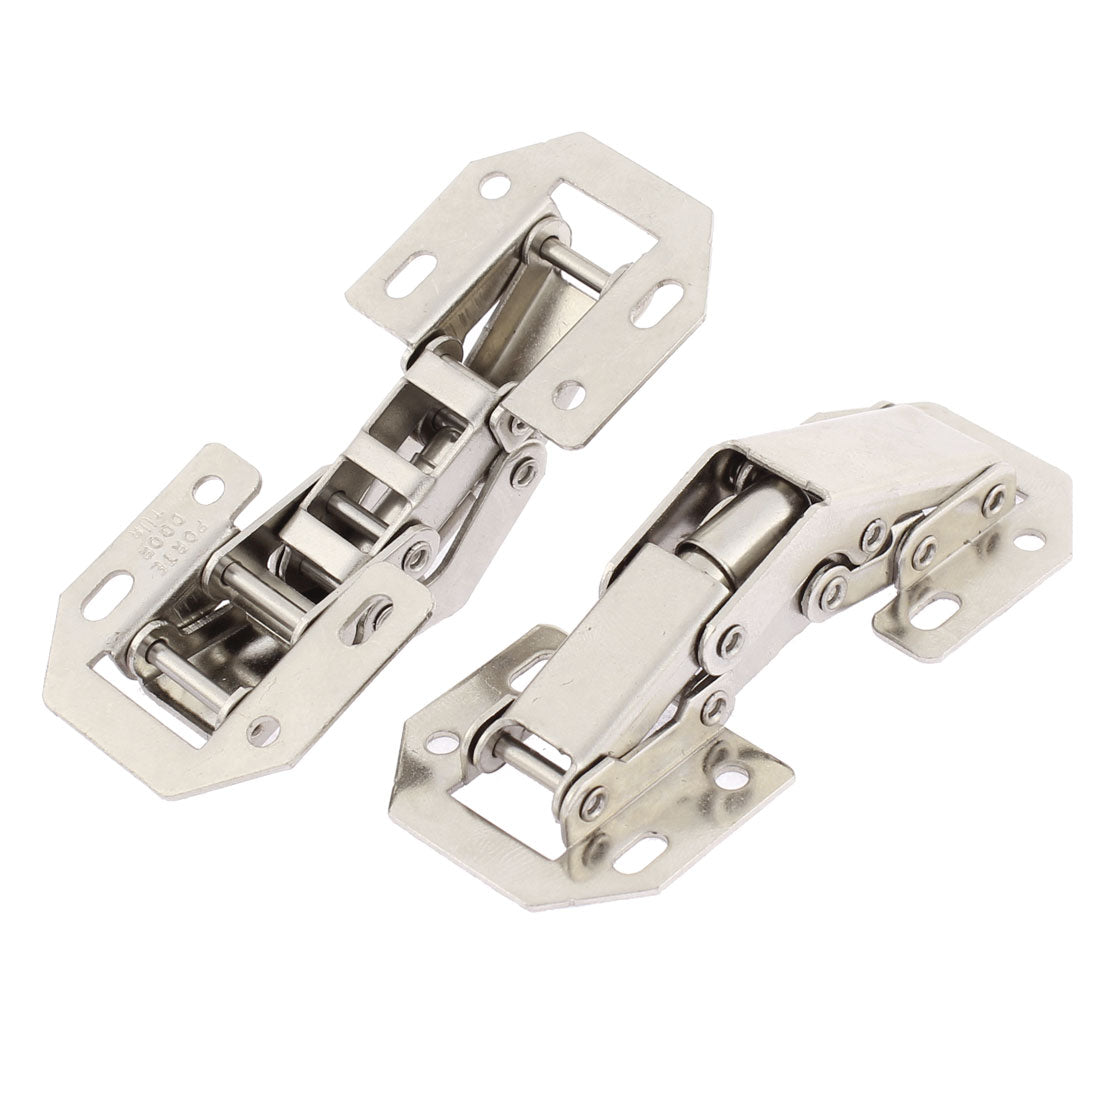 uxcell Uxcell 2 Pcs Silver Tone Metal 90 Degree Open Easy Mount Concealed Hinges for Cupboard Door Furniture Kitchen Cabinet